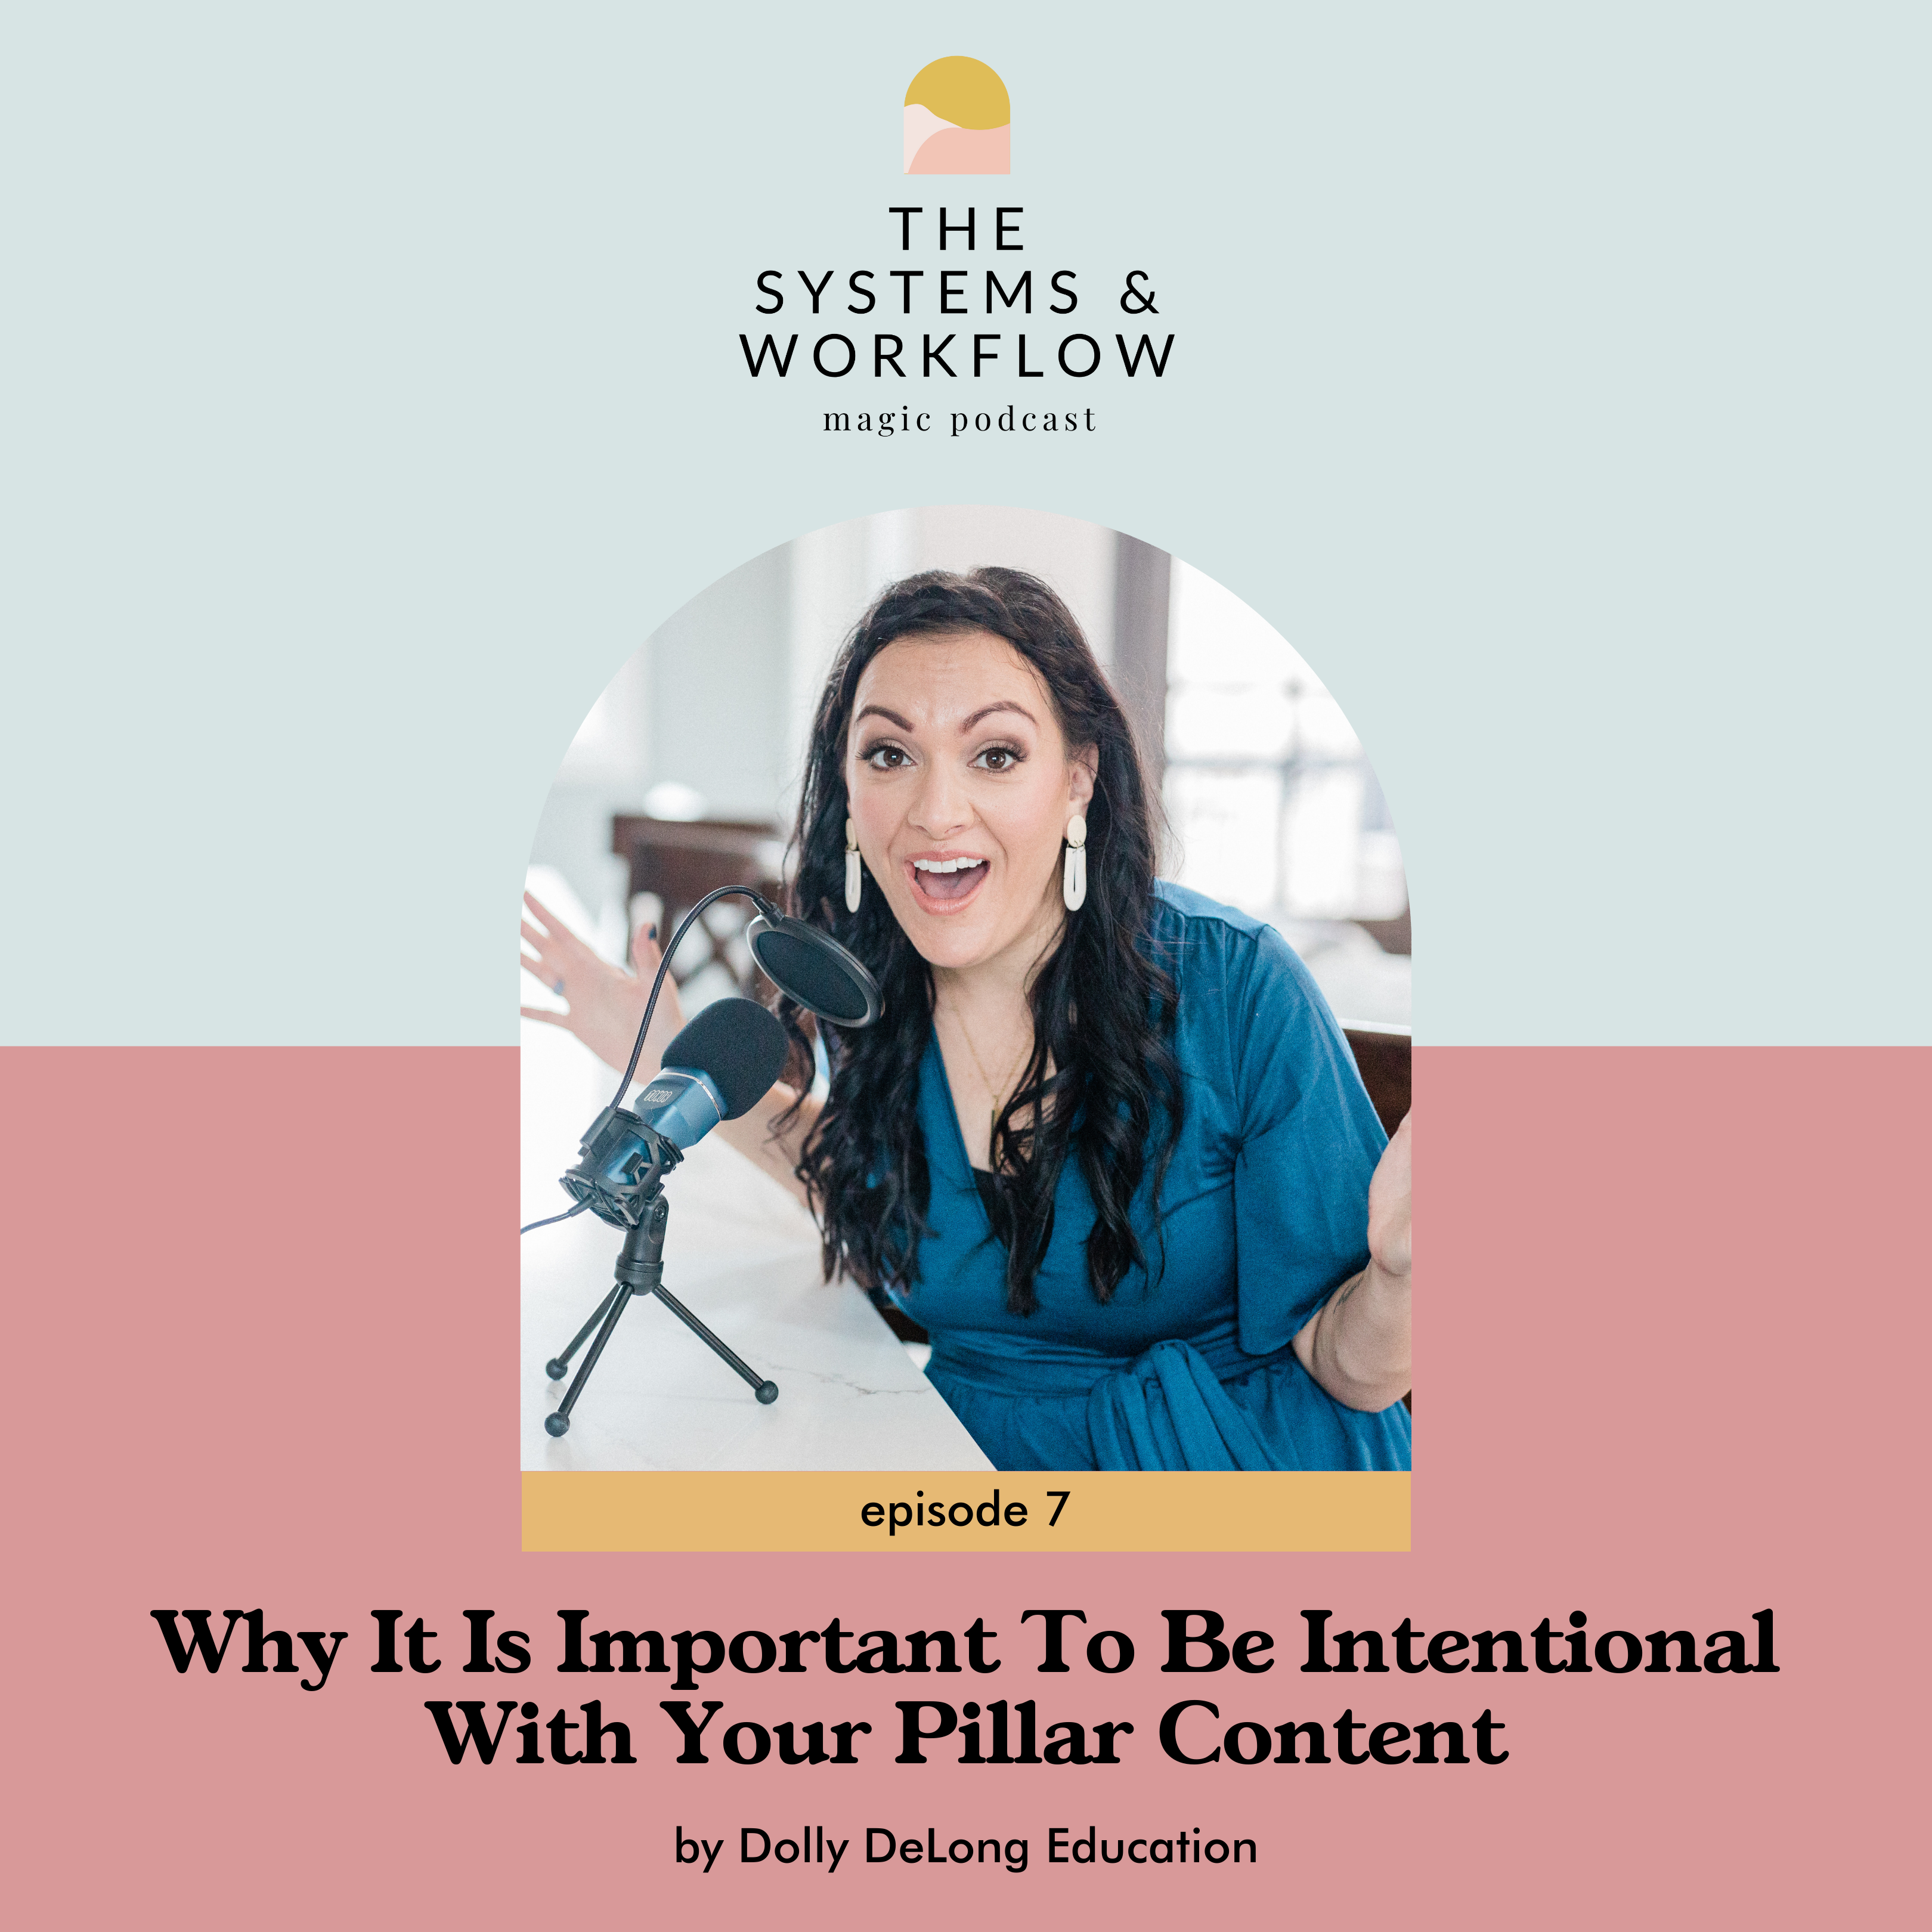 Why It is important to be intentional with your pillar content